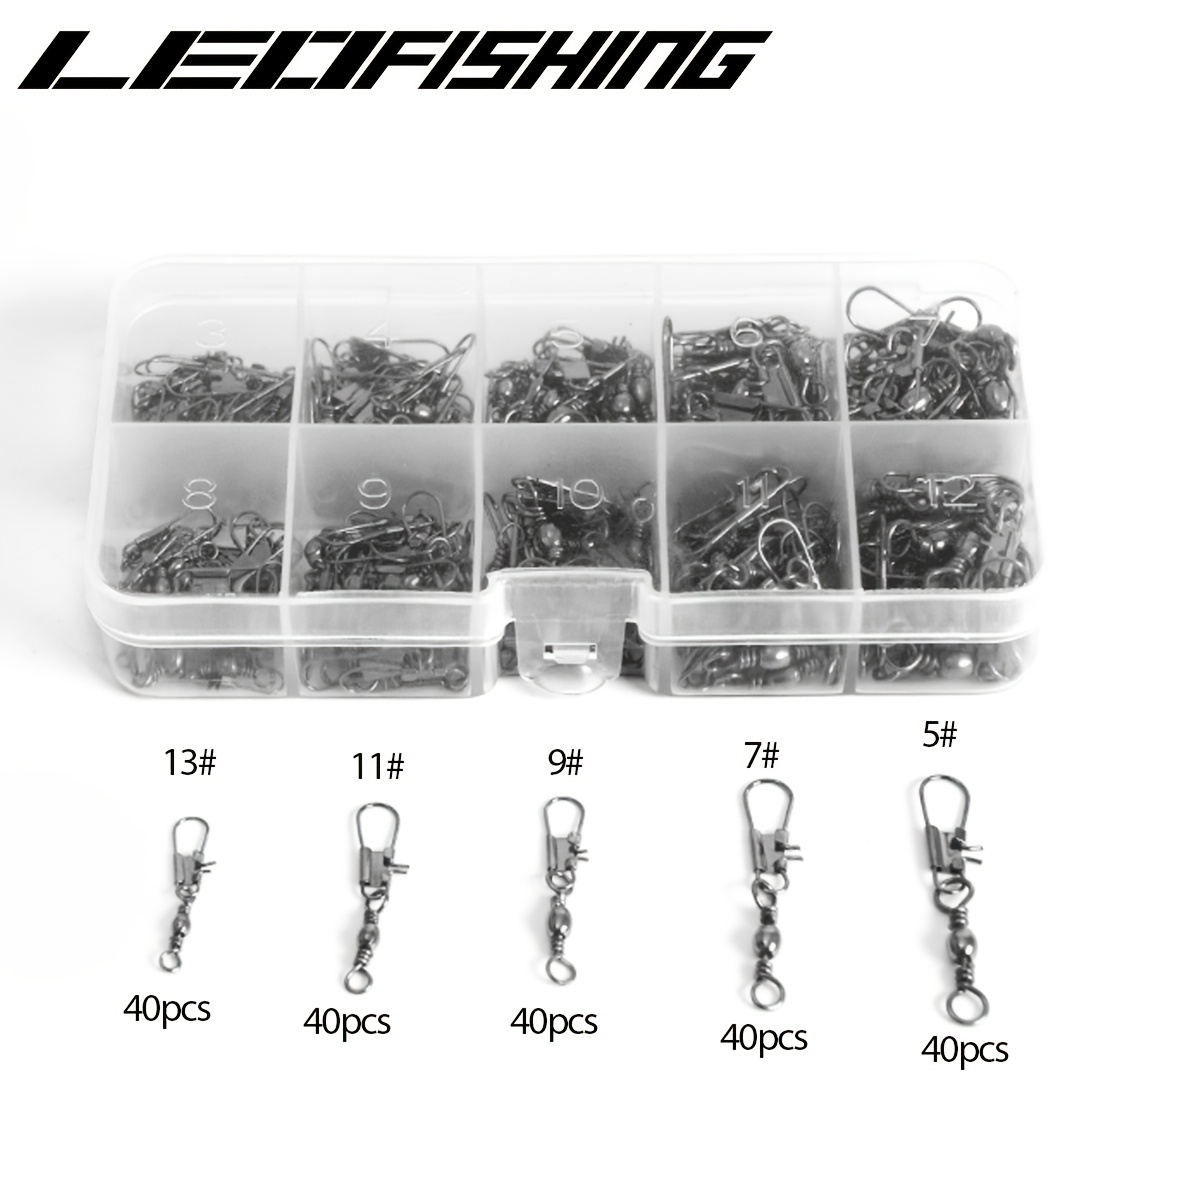 Barrel Snap Swivels Fishing, 100pcs Rolling Swivel with Safety